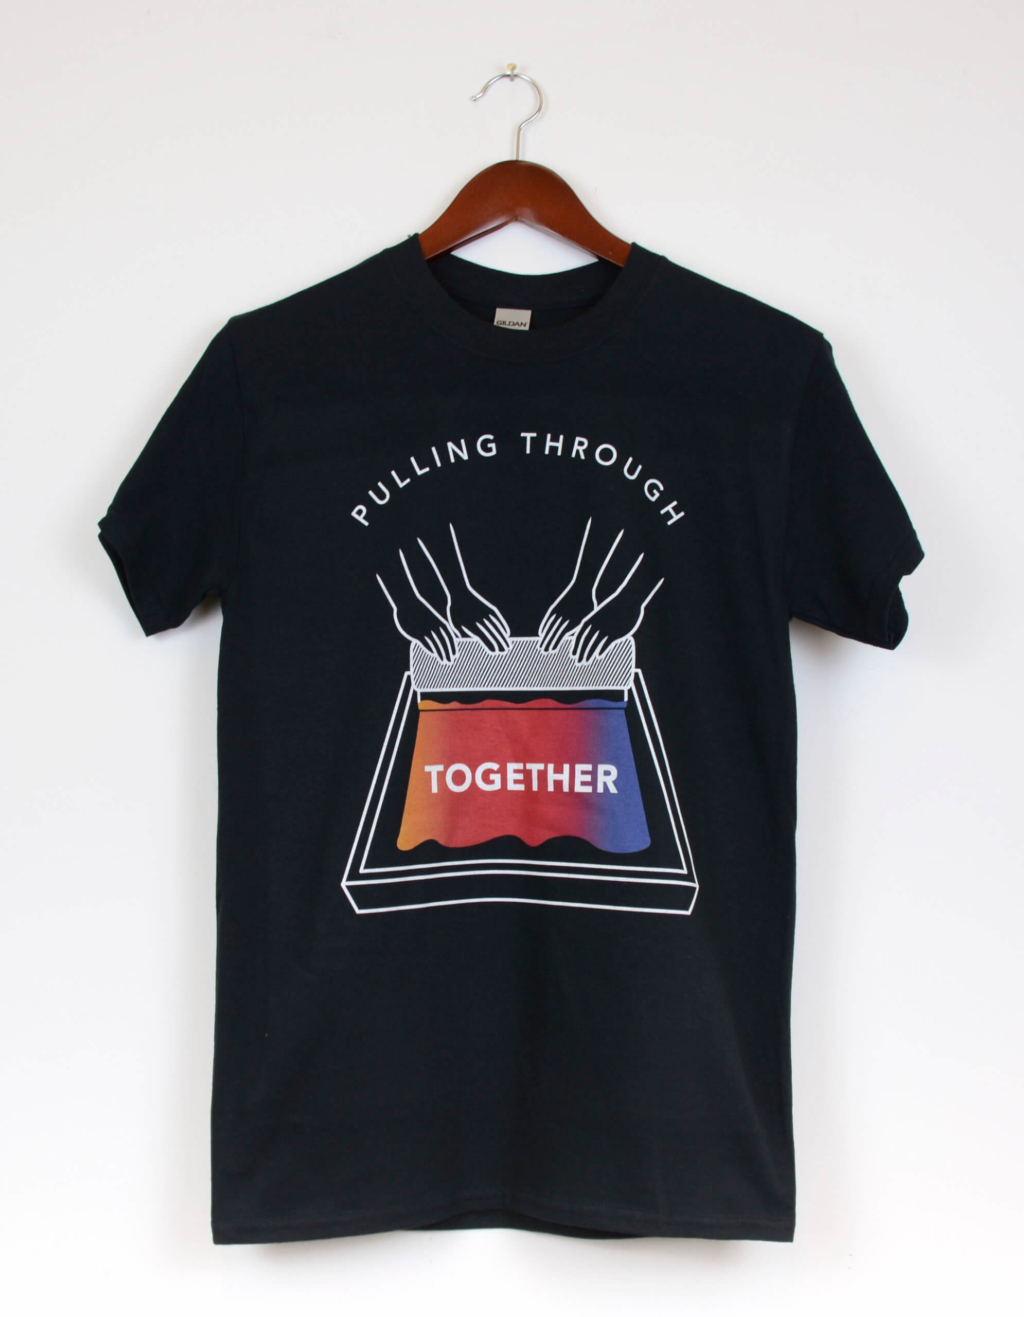 Black crew-neck t-shirt with graphic illustration of two pairs of hands pulling multicolour ink on a screen with a squeegee. The words in the graphic read "Pulling Through Together". The words ‘Pulling Through’ arch above the hands, and the word ‘Together’ is written on the silkscreen.